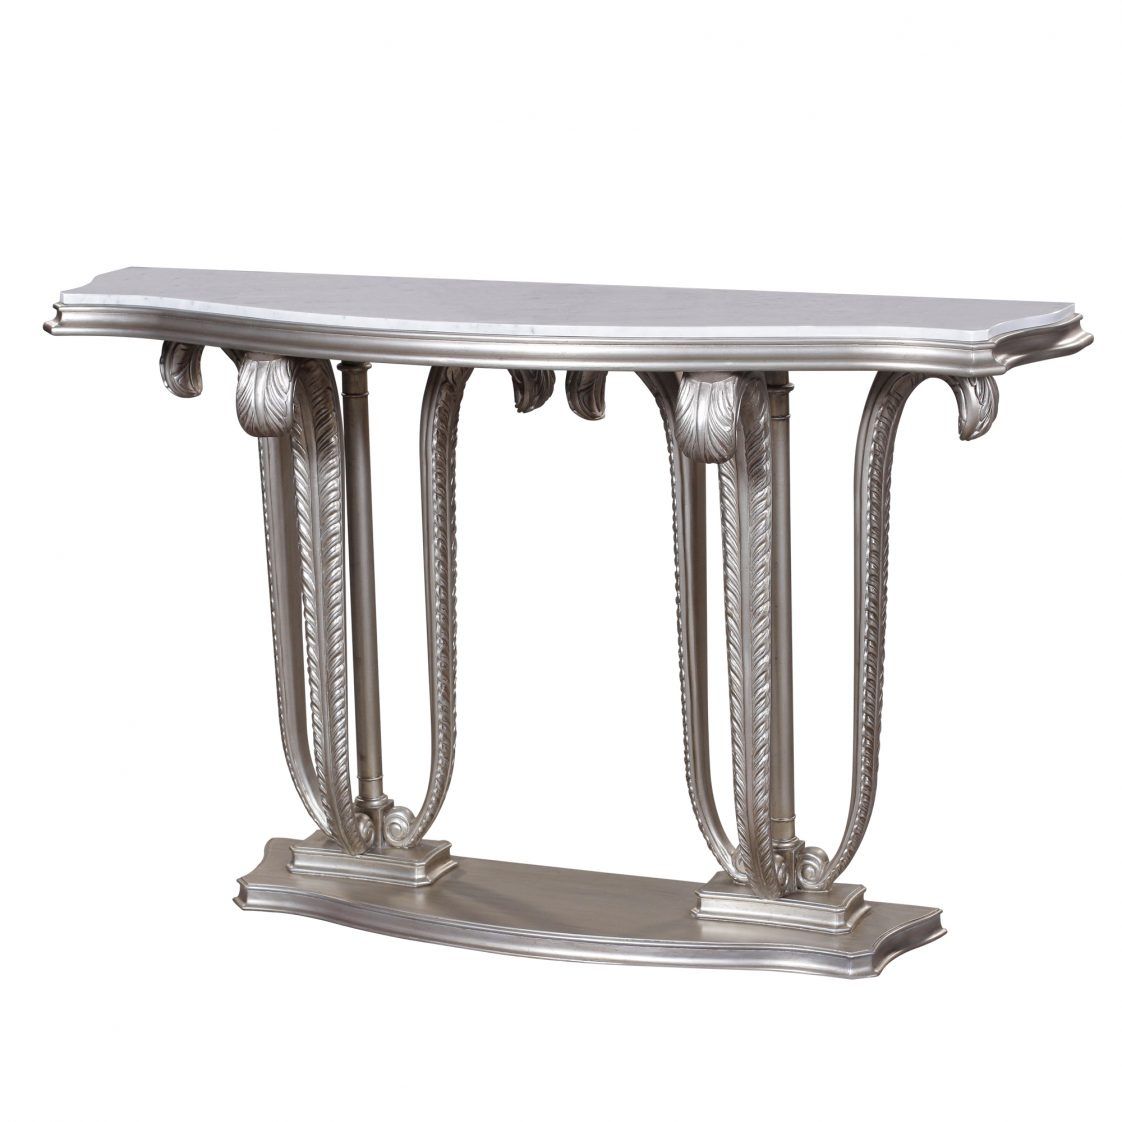 Console Table Plume White Marble | Jansen Furniture Within White Marble Console Tables (View 4 of 20)